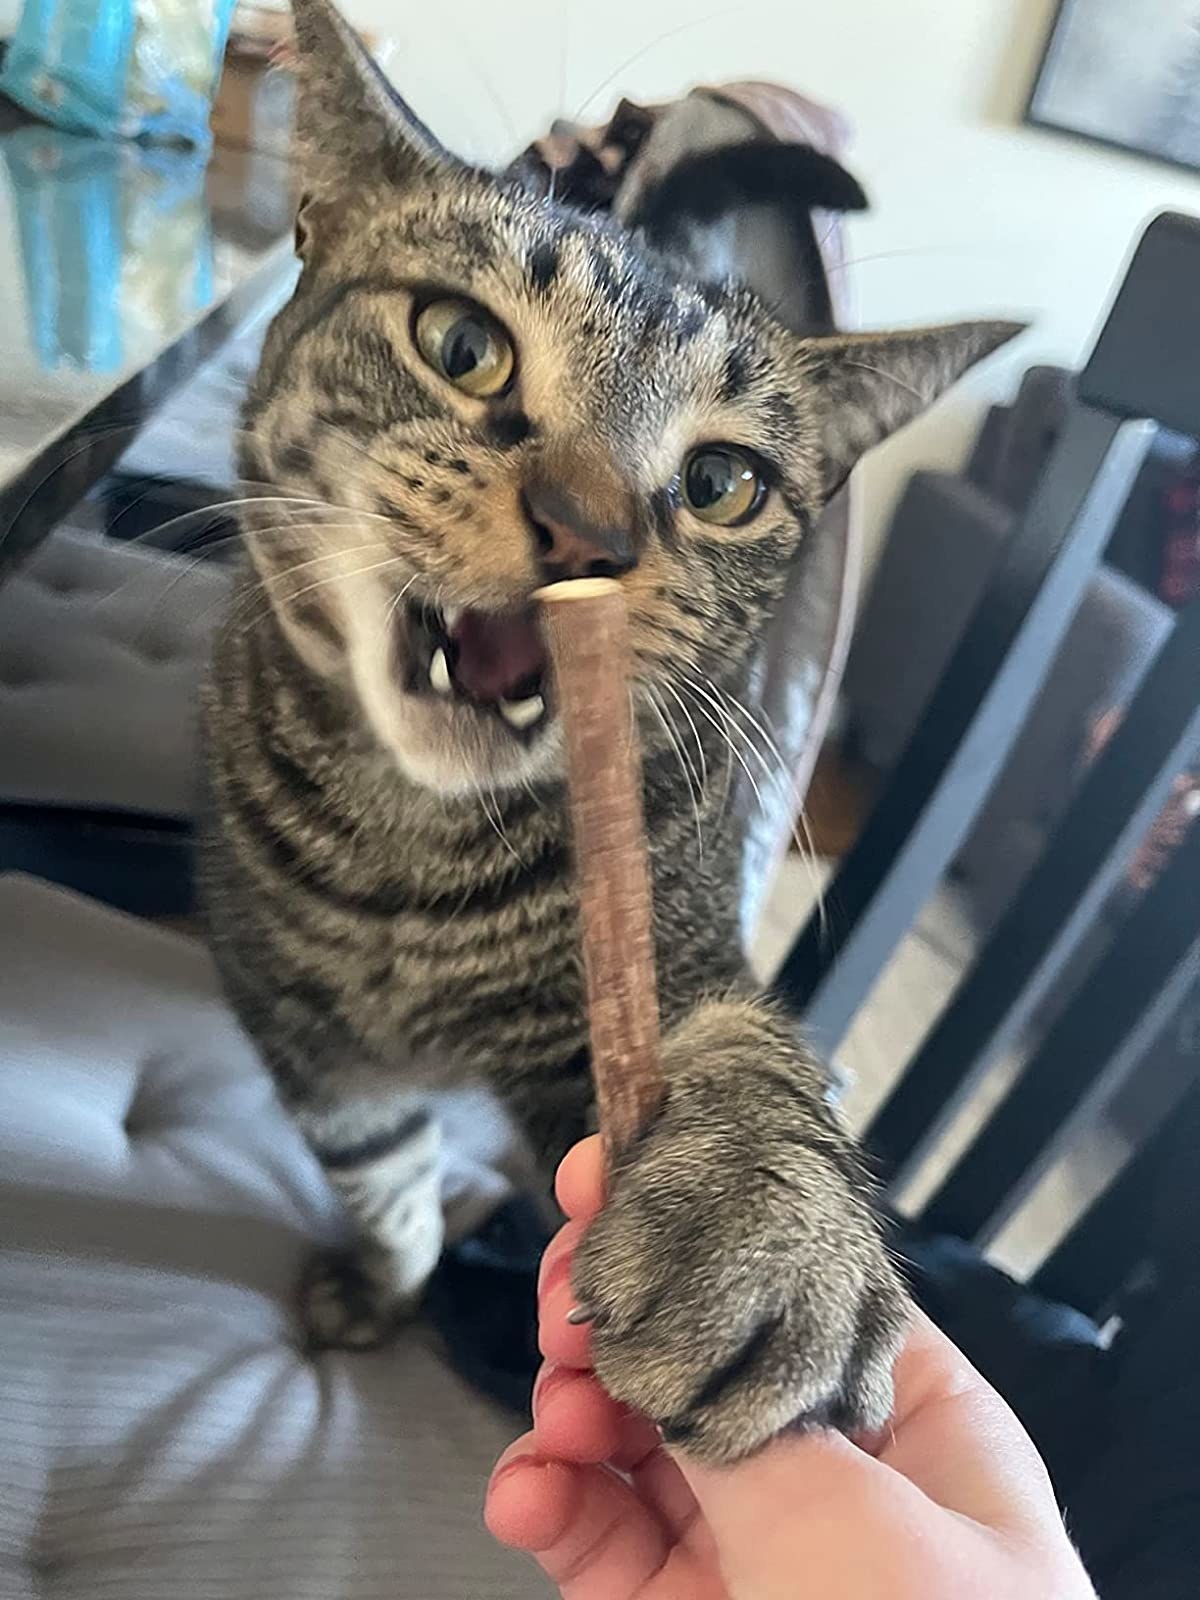 Black and brown striped cat chewing on stick